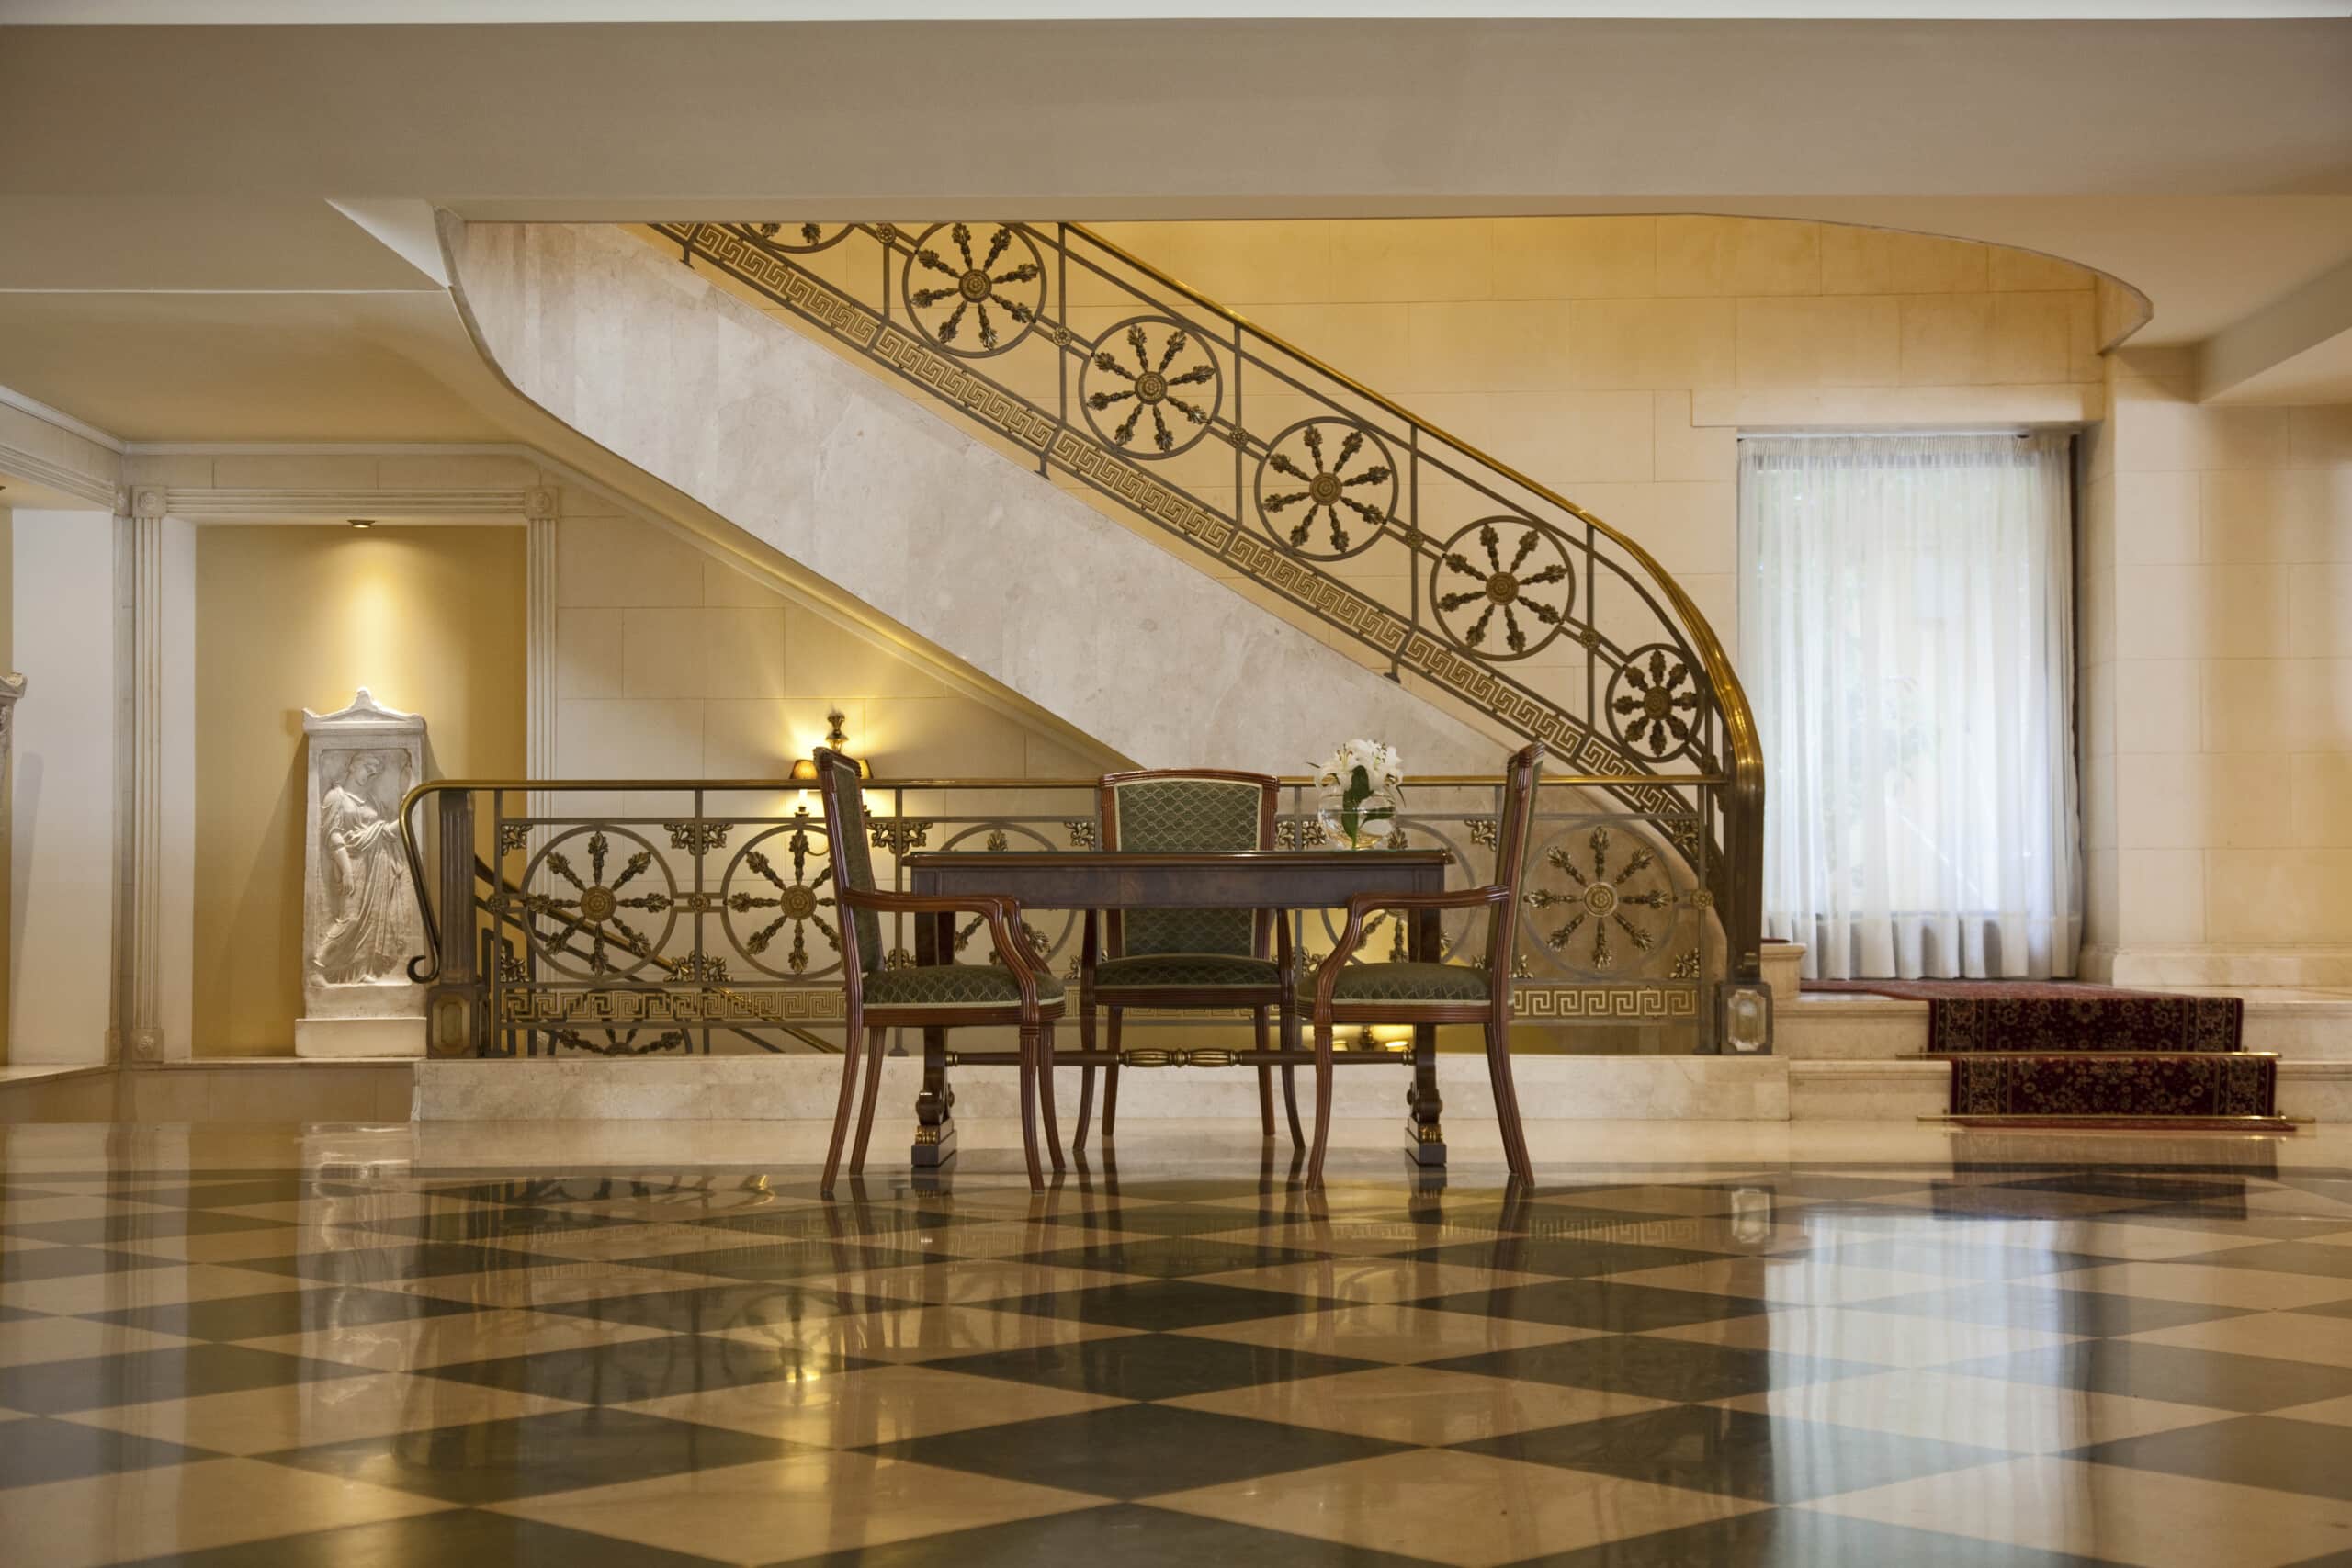 Electra_Palace_Athens_Lobby_Stairs